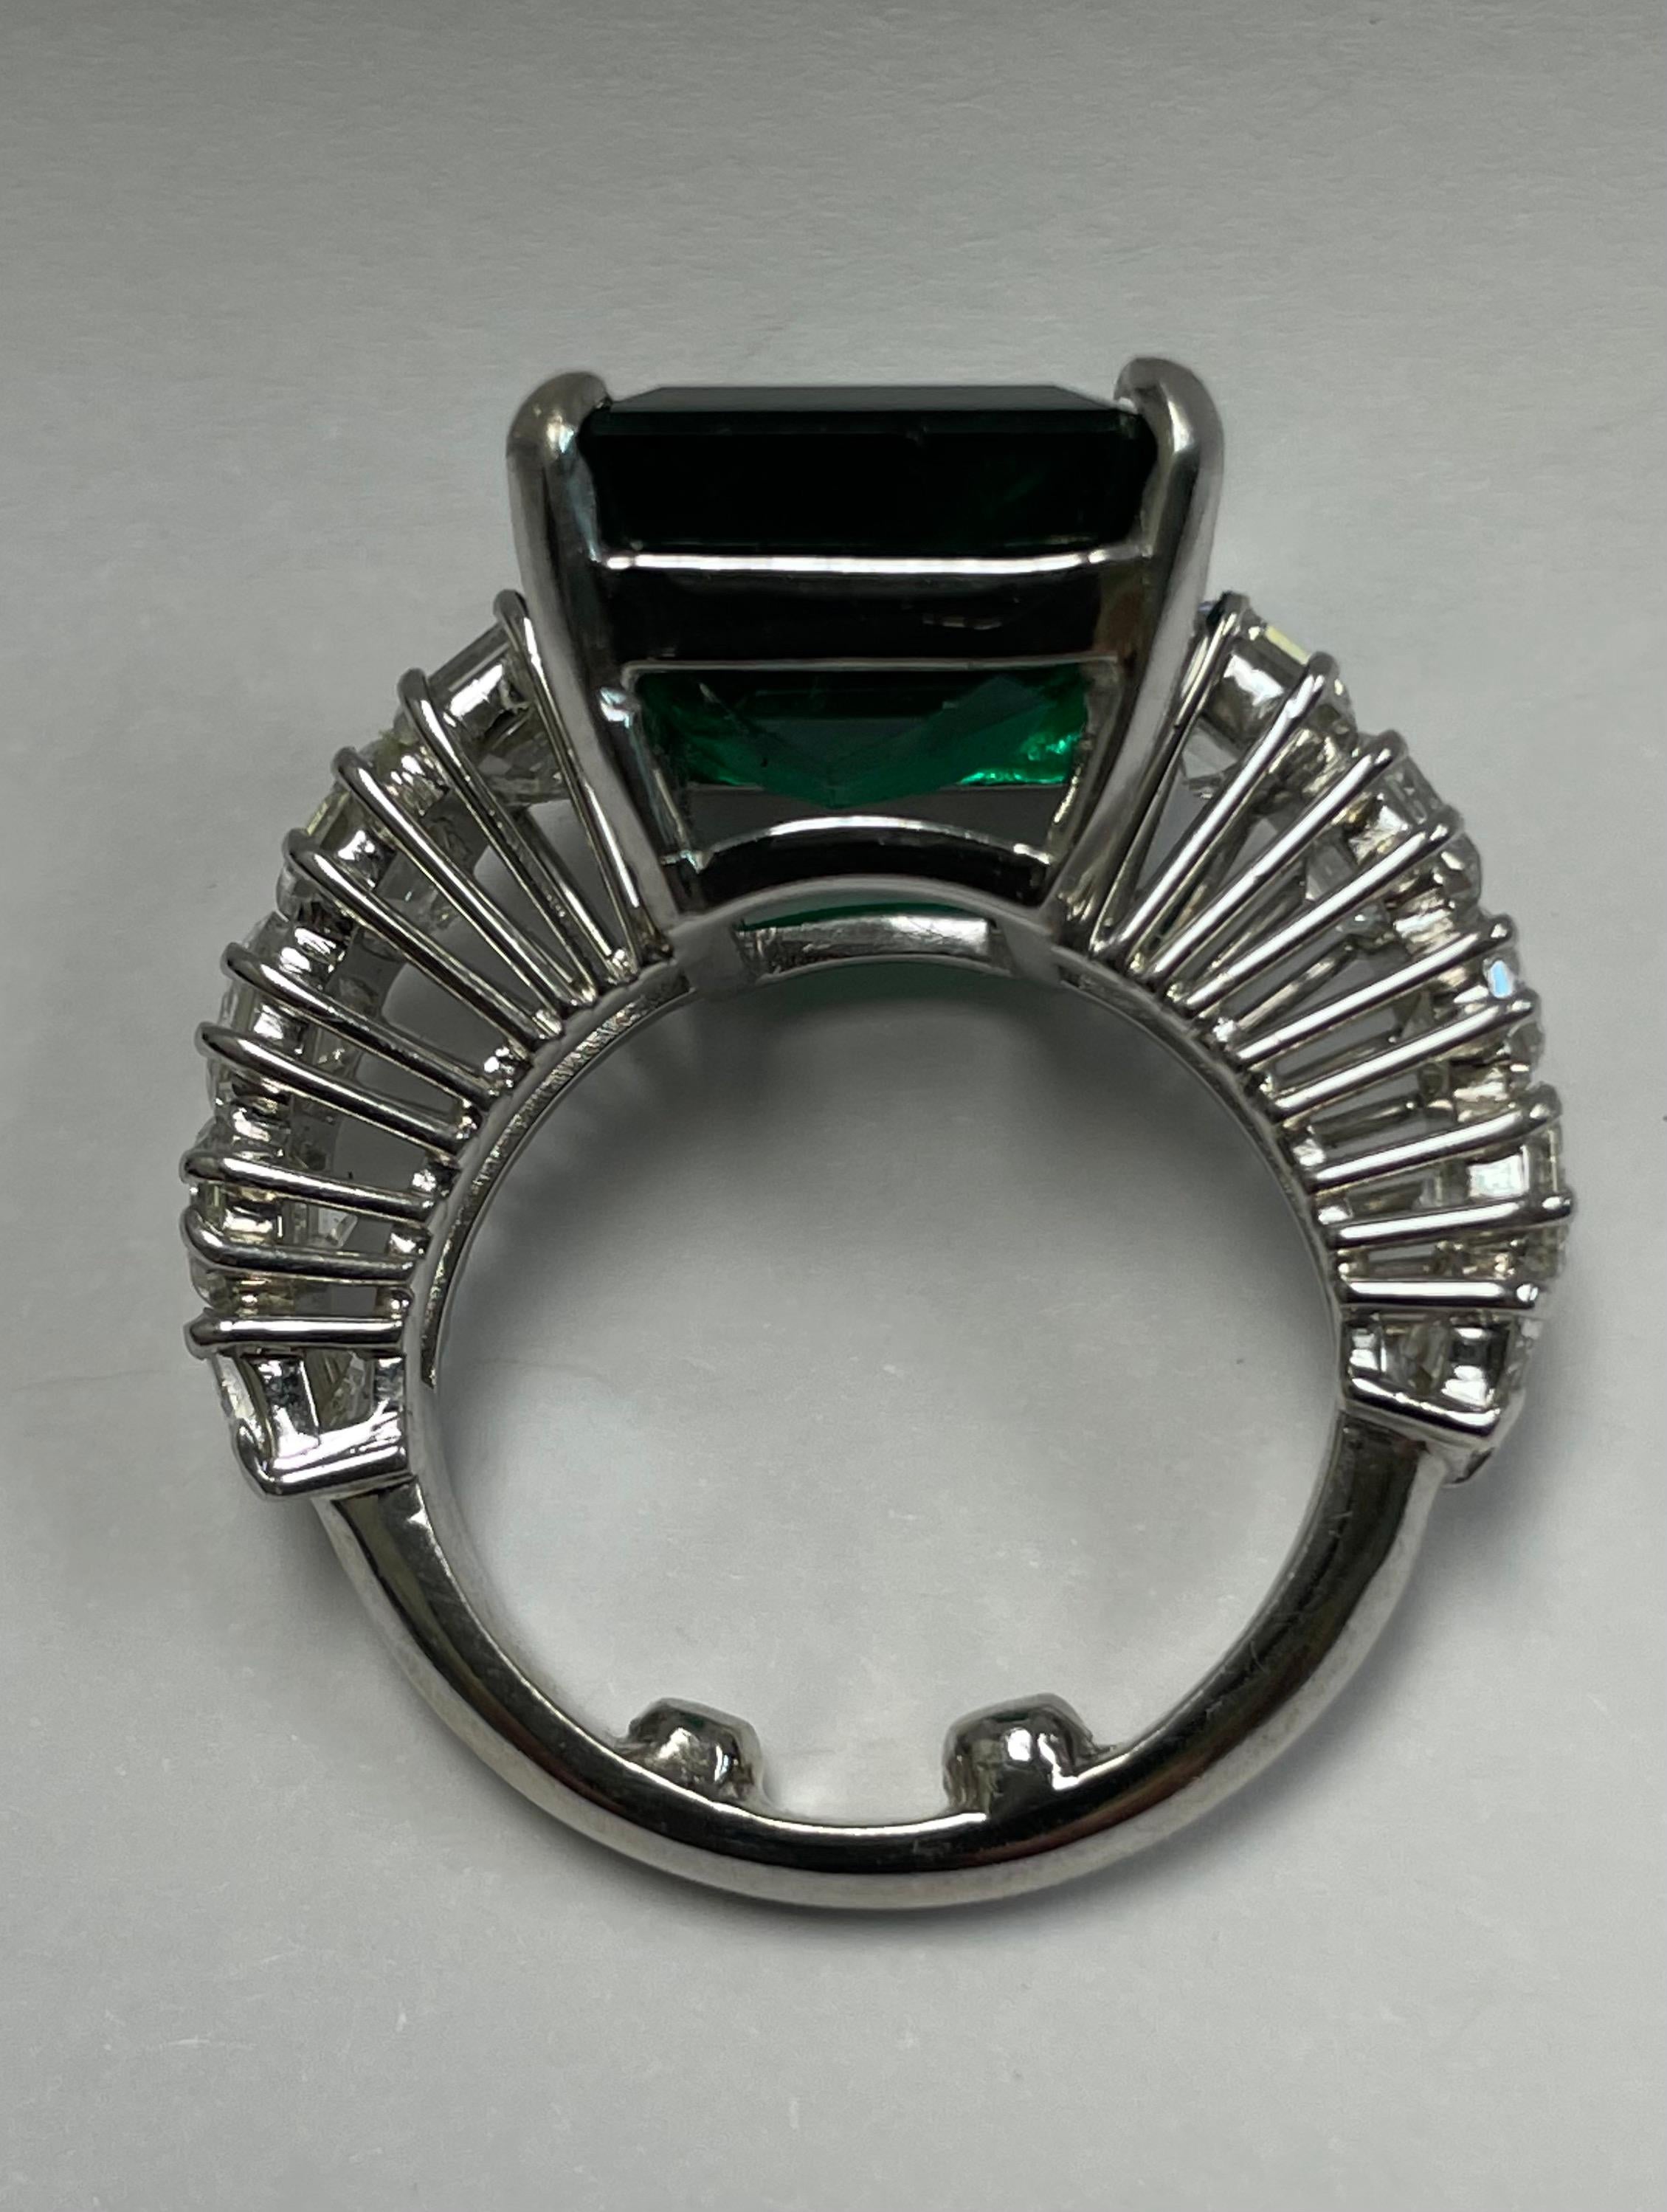 18K White gold Emerald and Diamond ring. The center stone in a natural Emerald, weight 9.74 carat with a Gemological report from the GIA. On the side the ring is set with 10 emerald cut Diamonds, total weight 5.30 carats, F color VS clarity.